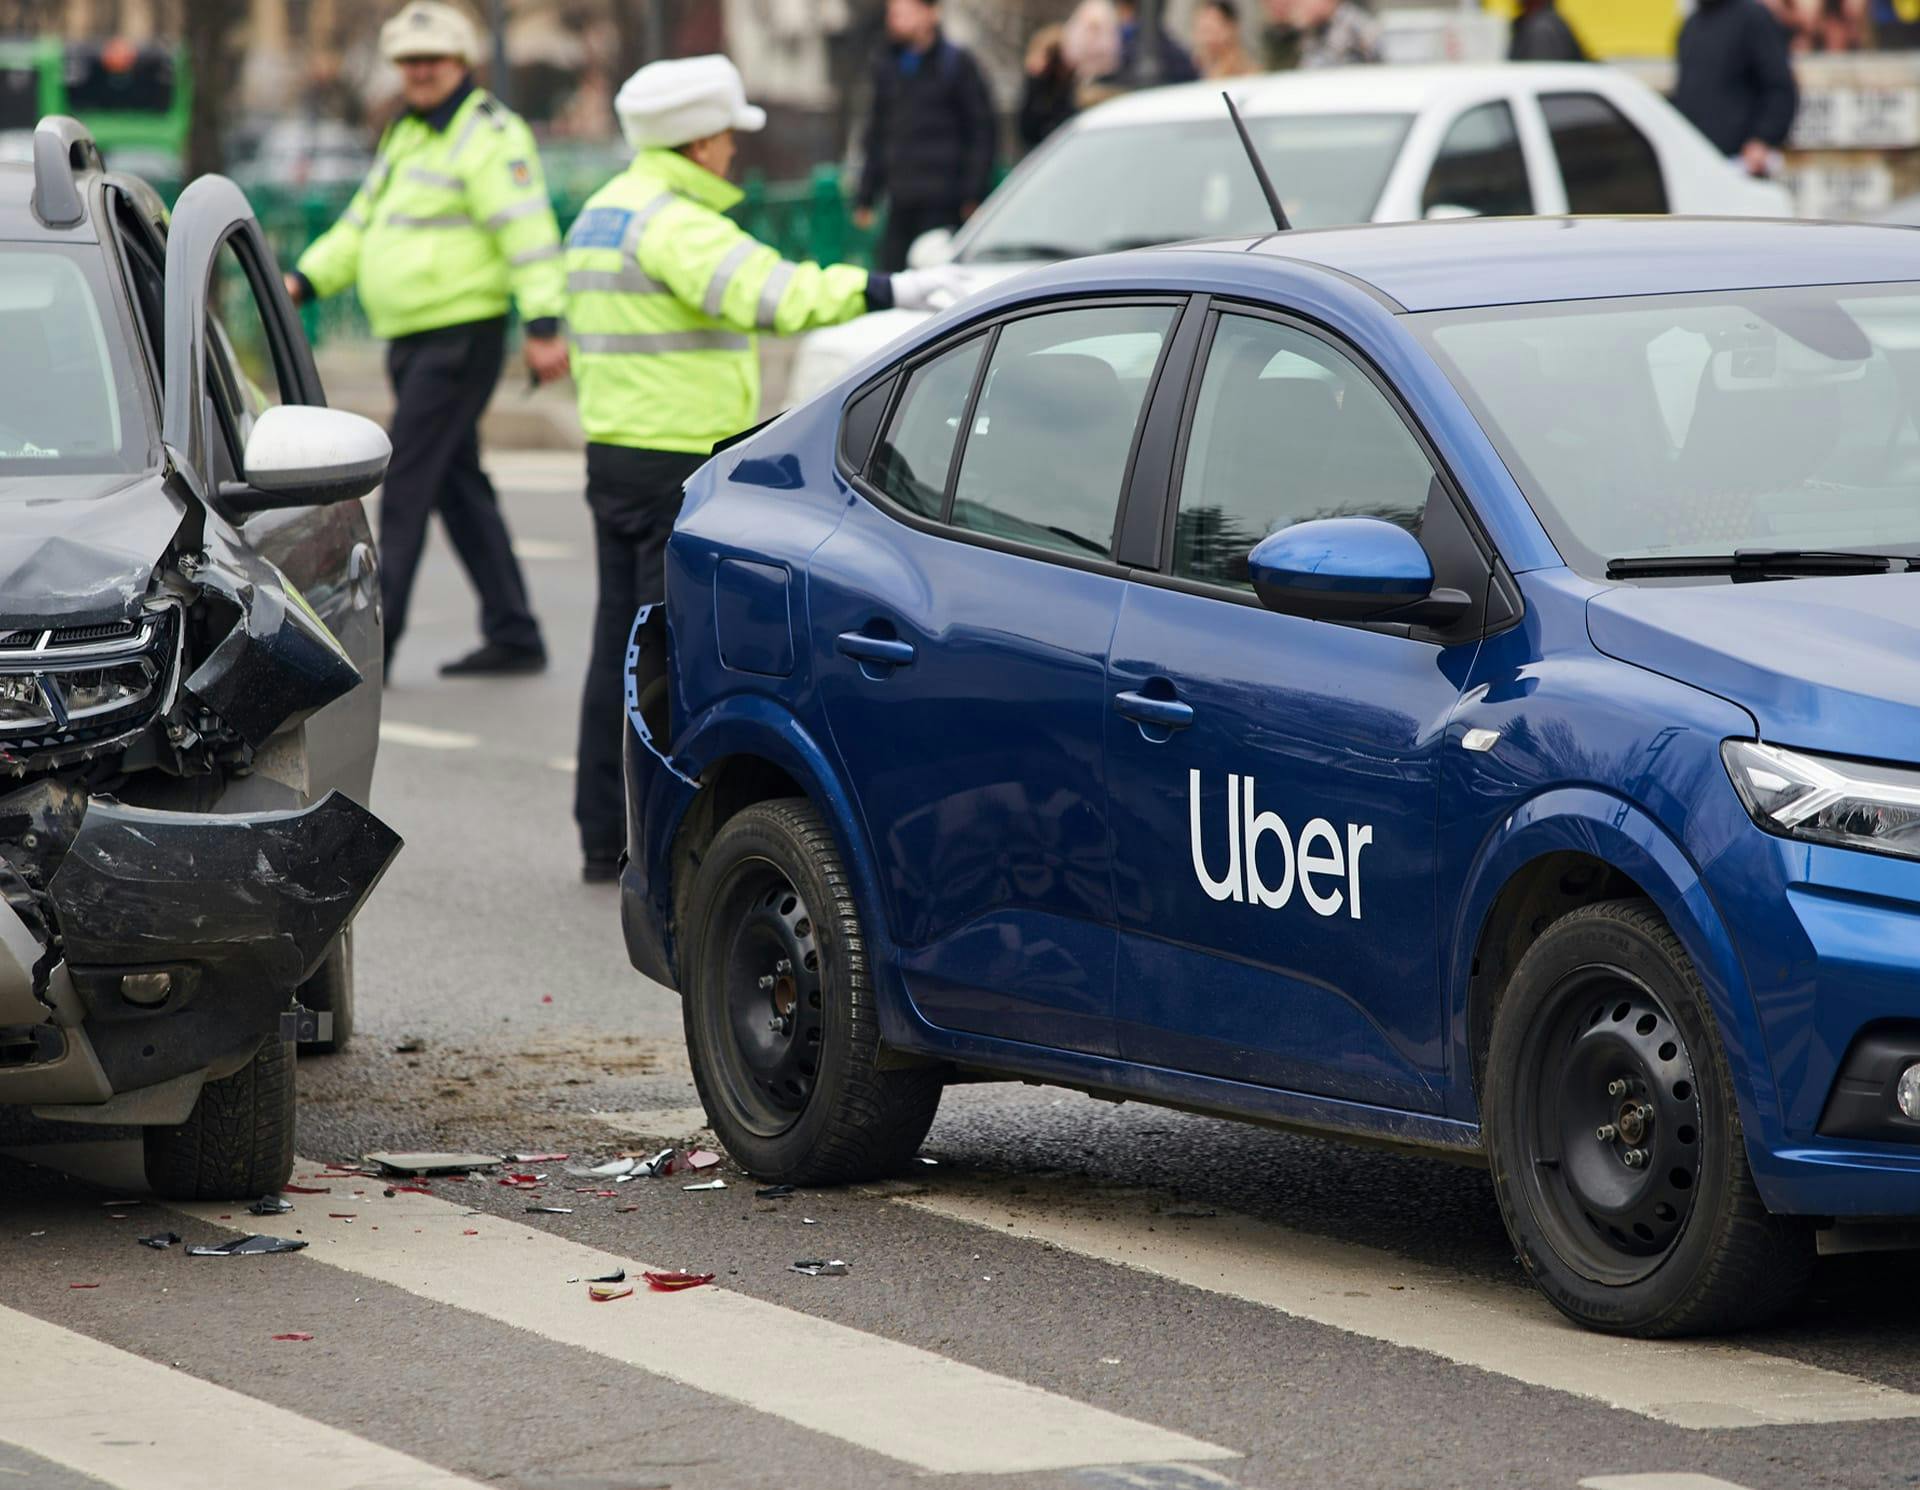 Uber in car accident